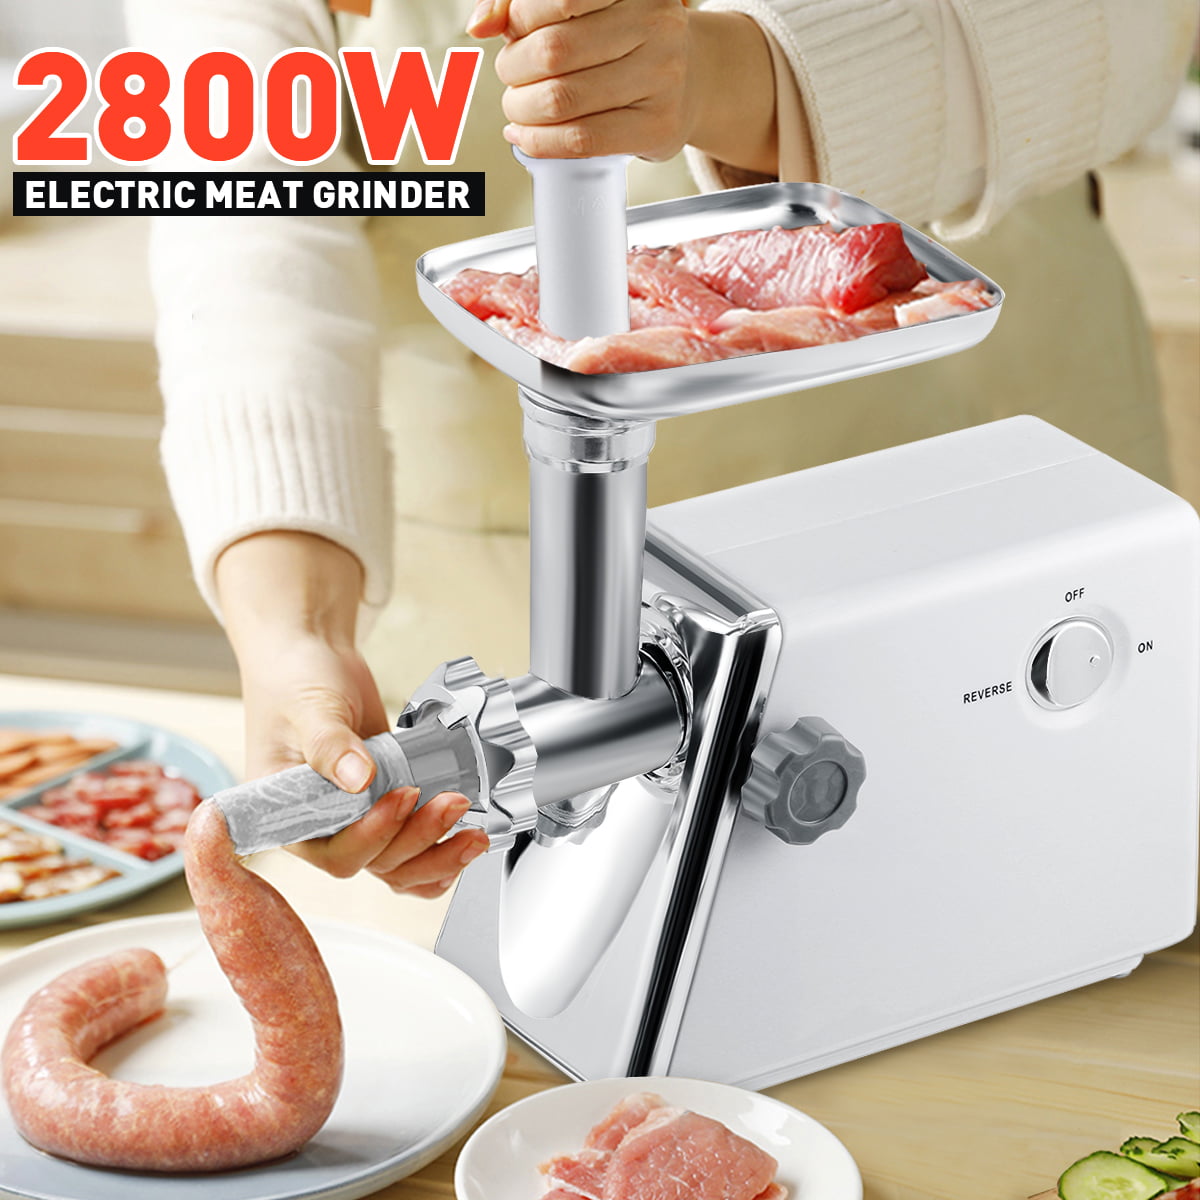 2800W Electric Meat Grinder Machine Sausage Maker Mincer Stuffer Stainless Steel 